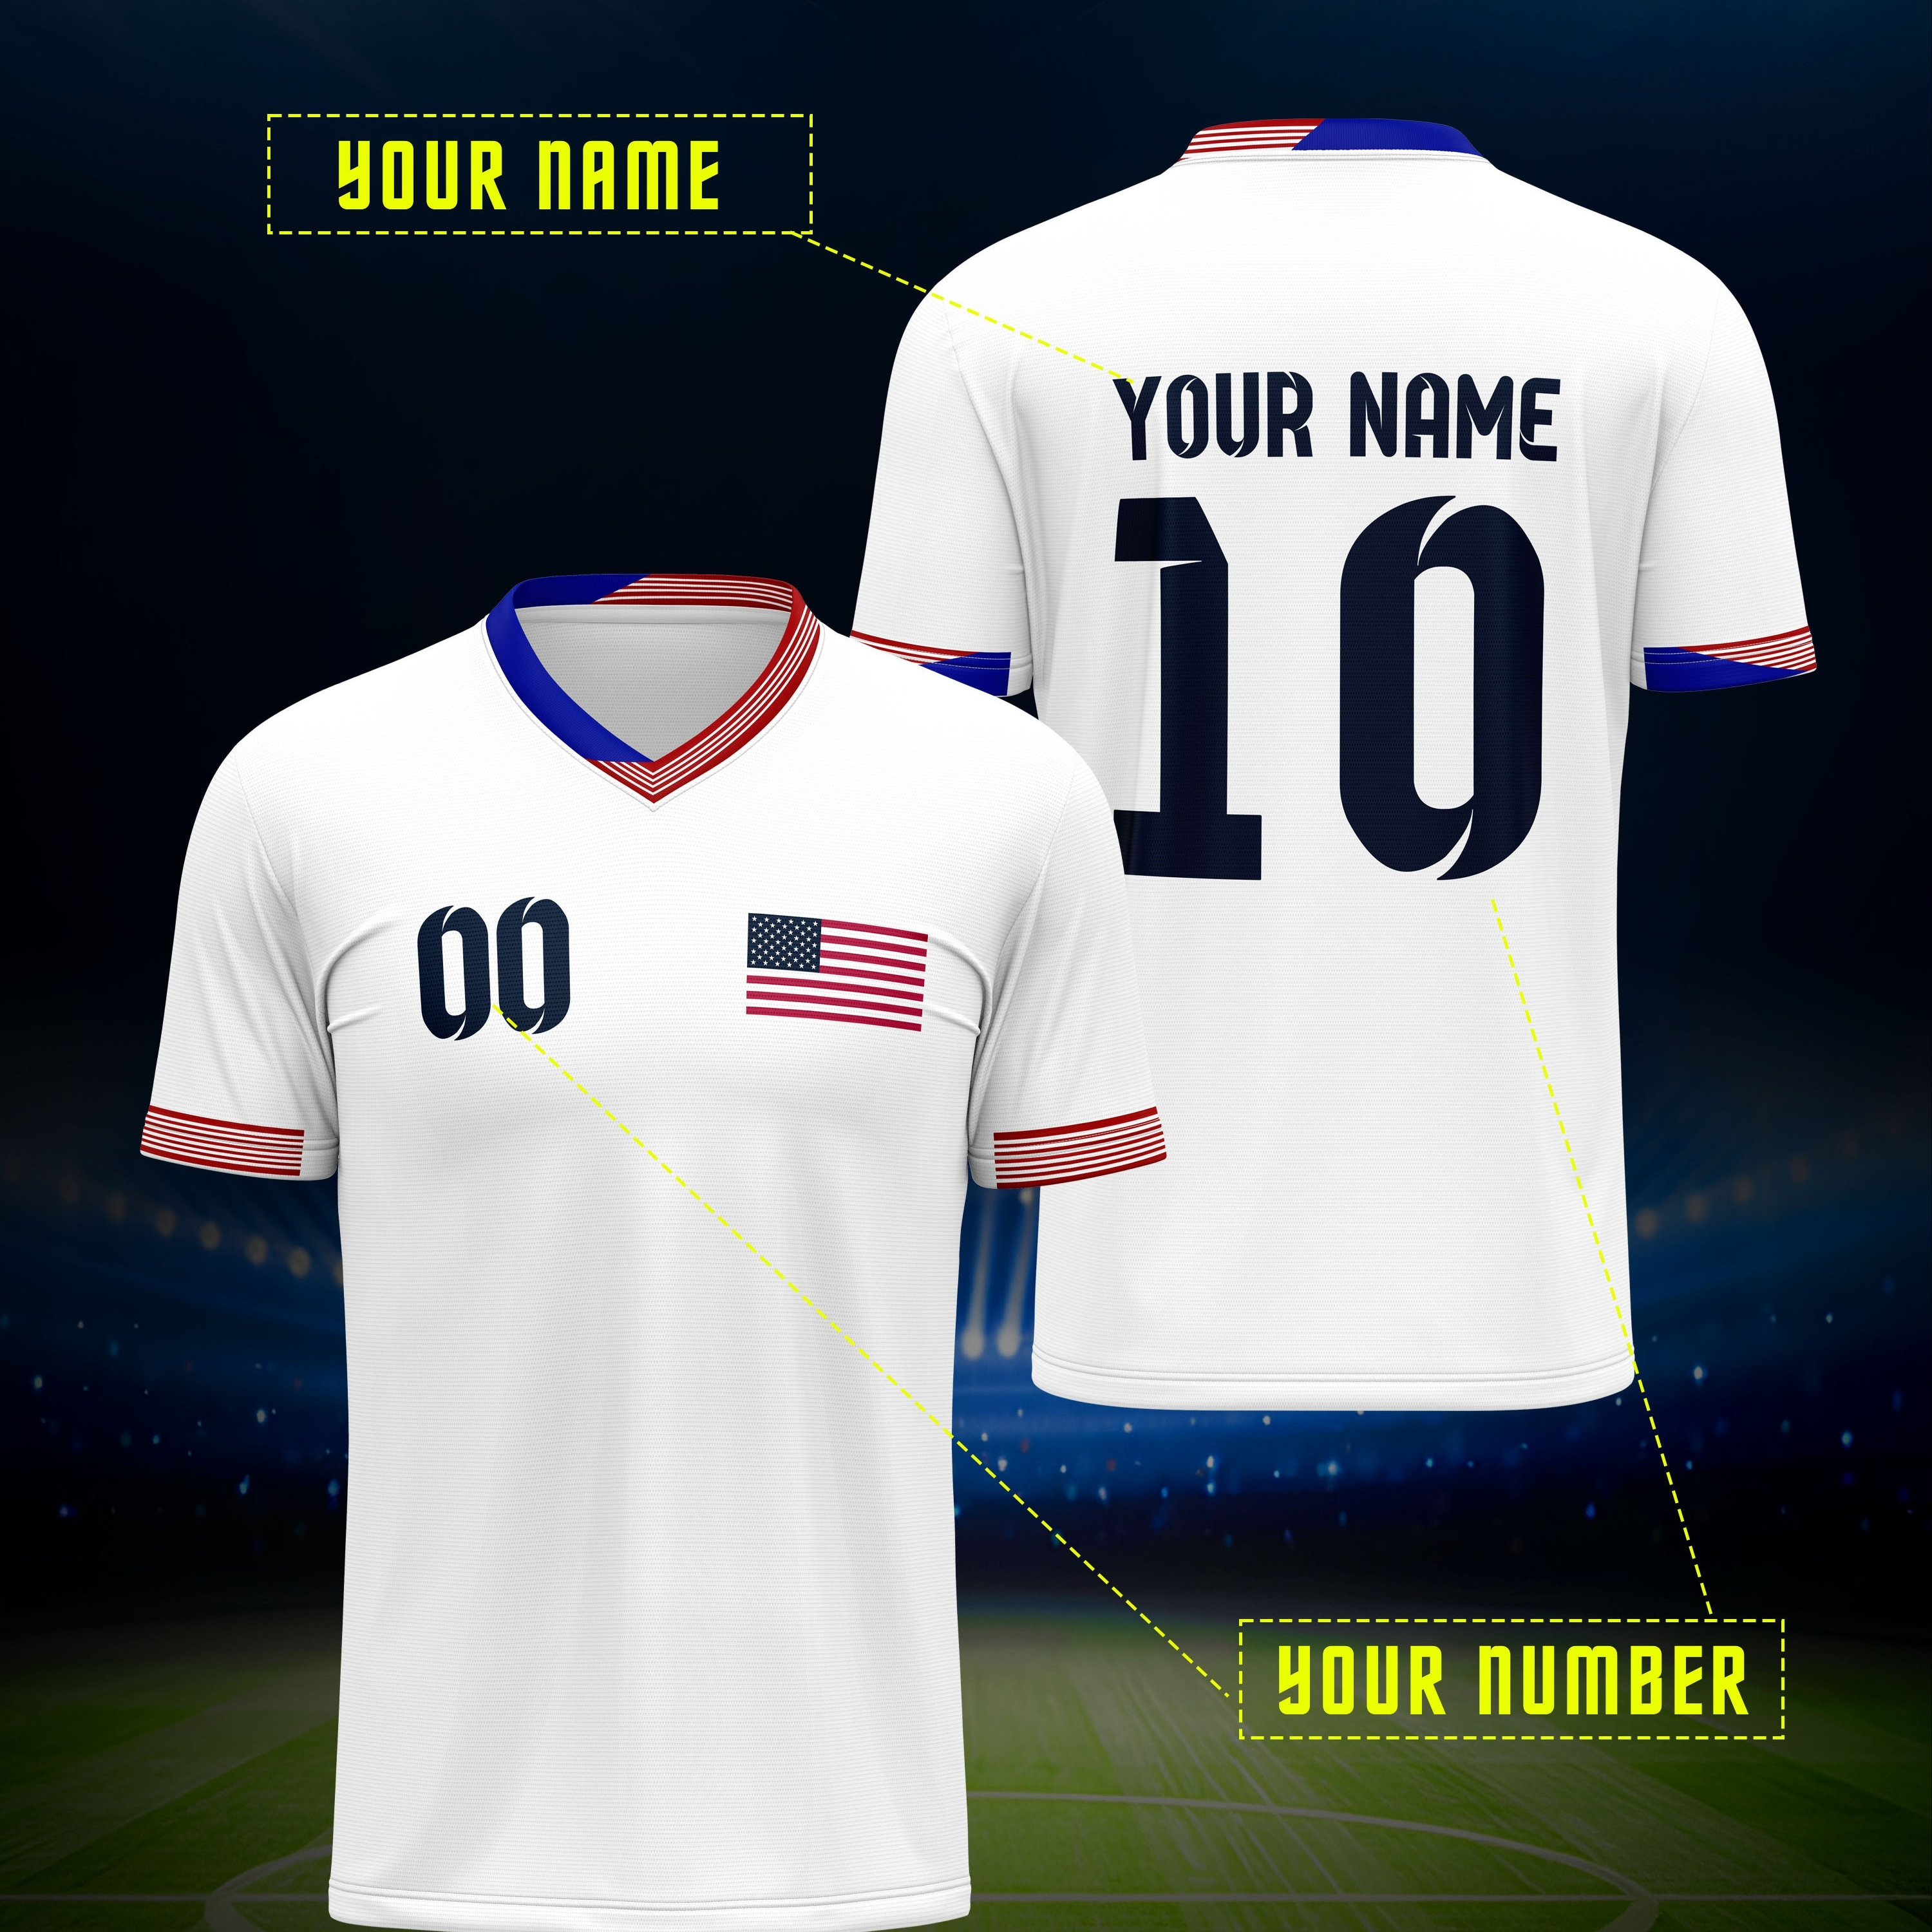 

Customized Name & Number, Men's Athletic Soccer Shirt, Short Sleeve Sports Tee, Breathable Casual Sportswear Top